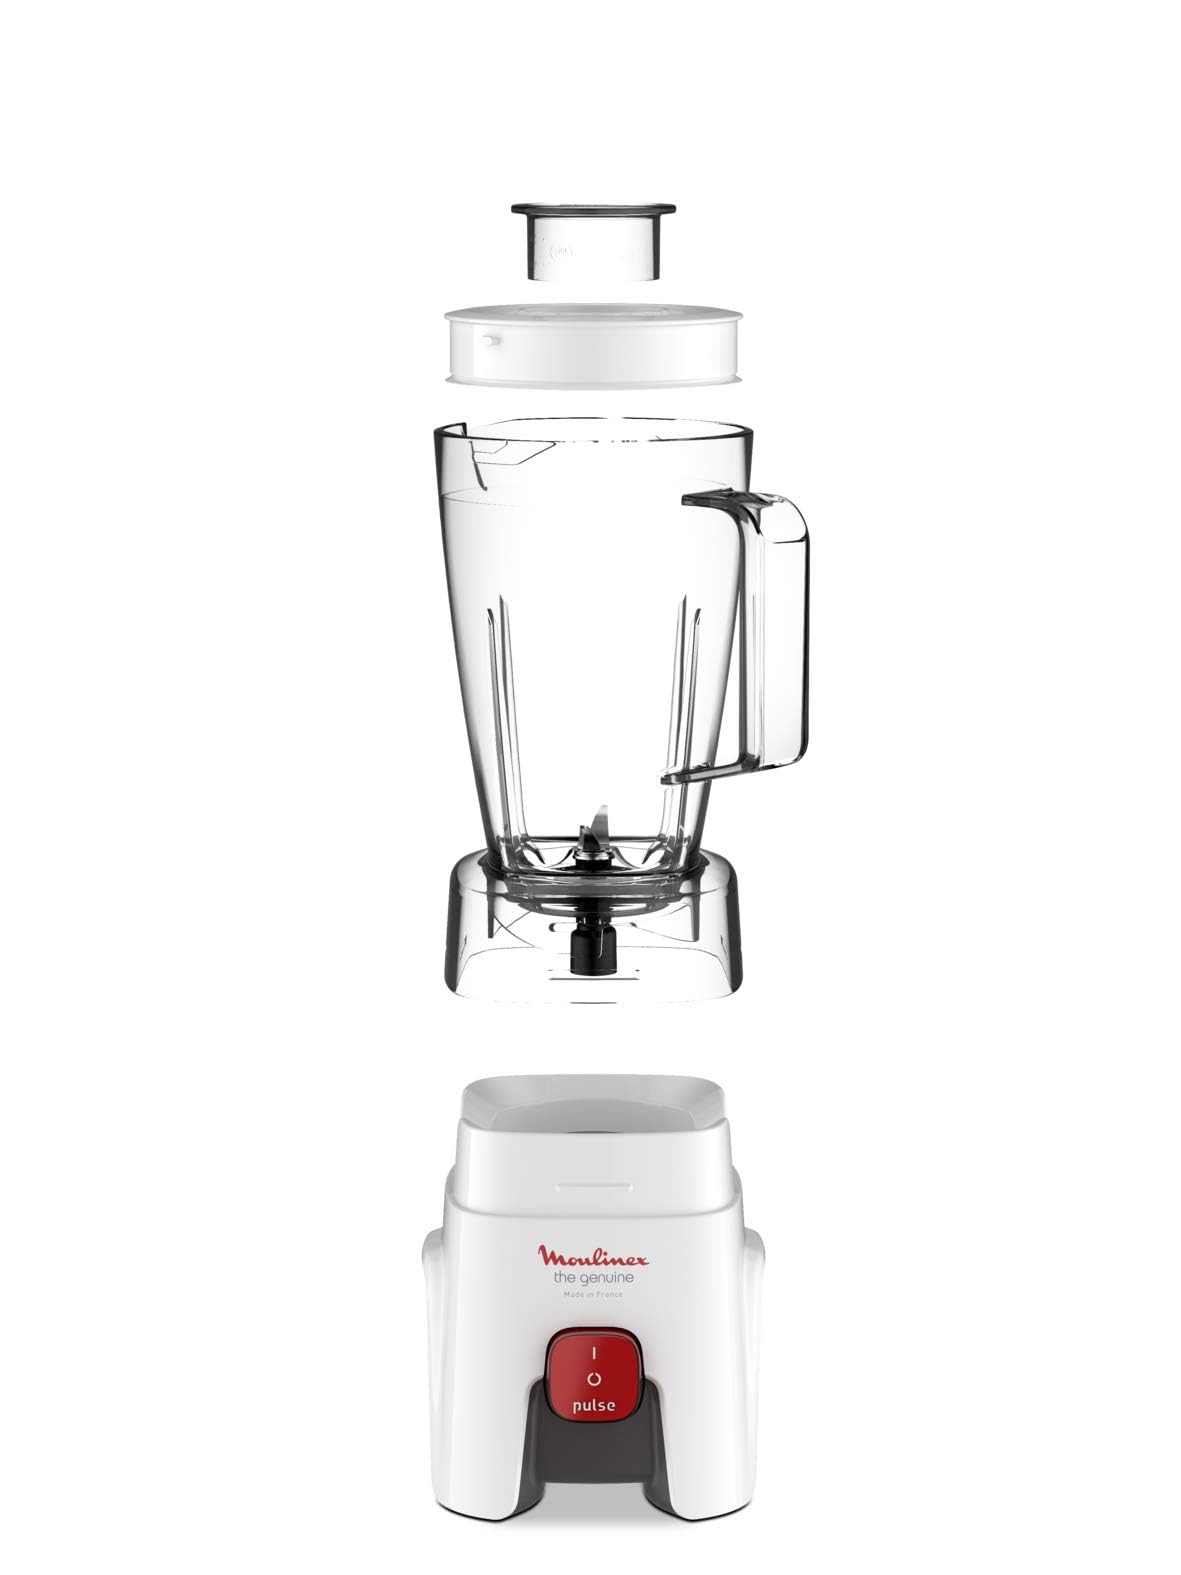 Moulinex Blender, Genuine Blender mixer, with Grinder and Grater Accessories, One Speed and Pulse Function,White,1.75 L , LM242B28